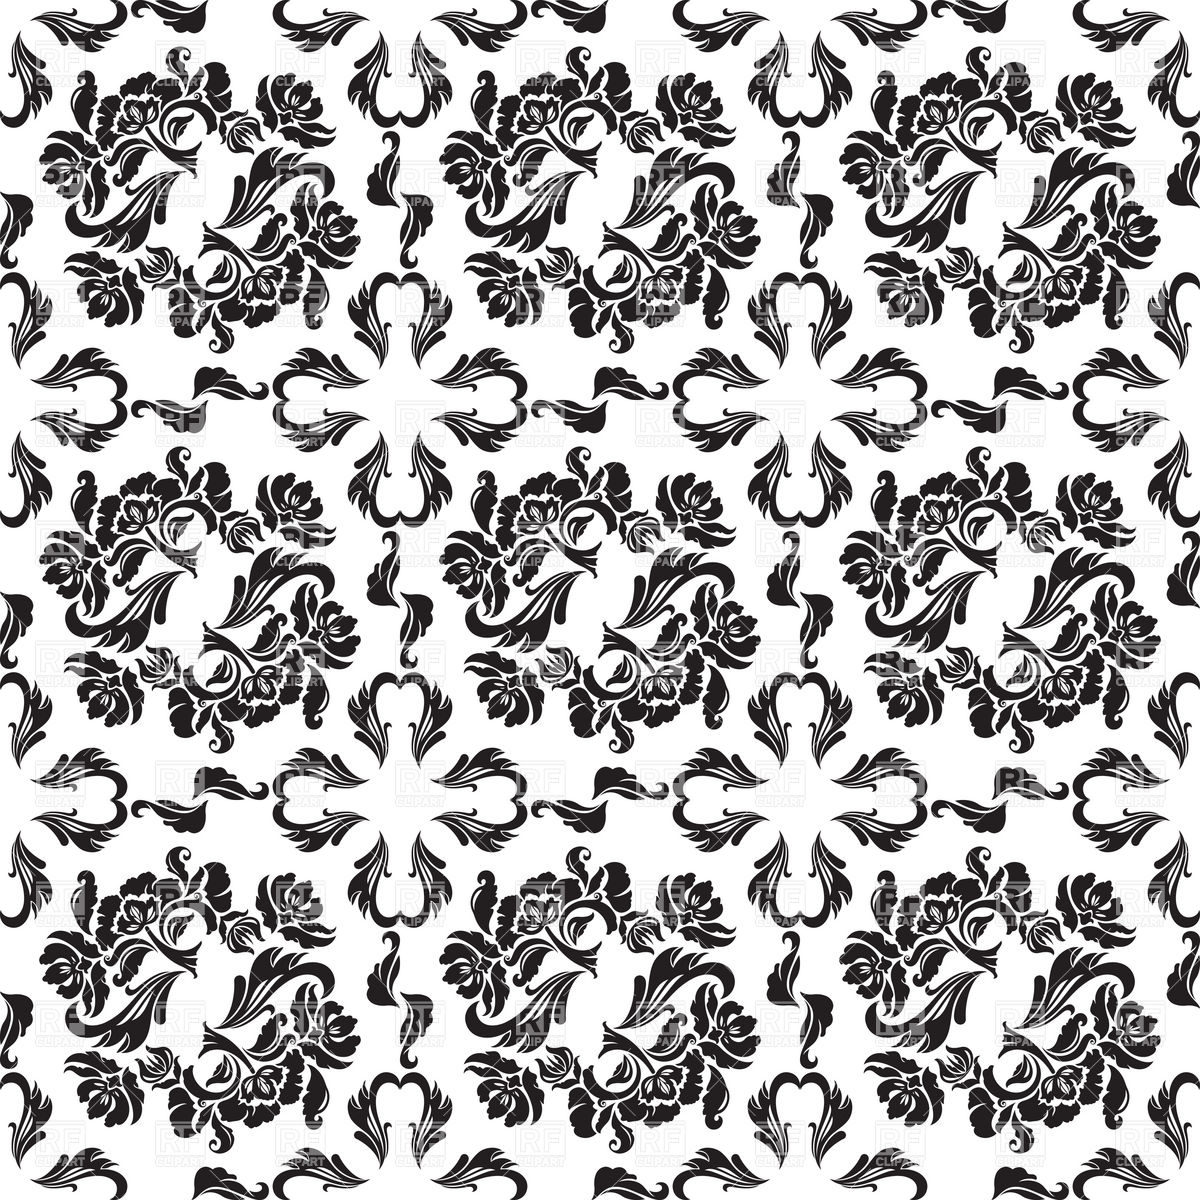 Seamless victorian wallpaper with floral pattern 18888 Backgrounds